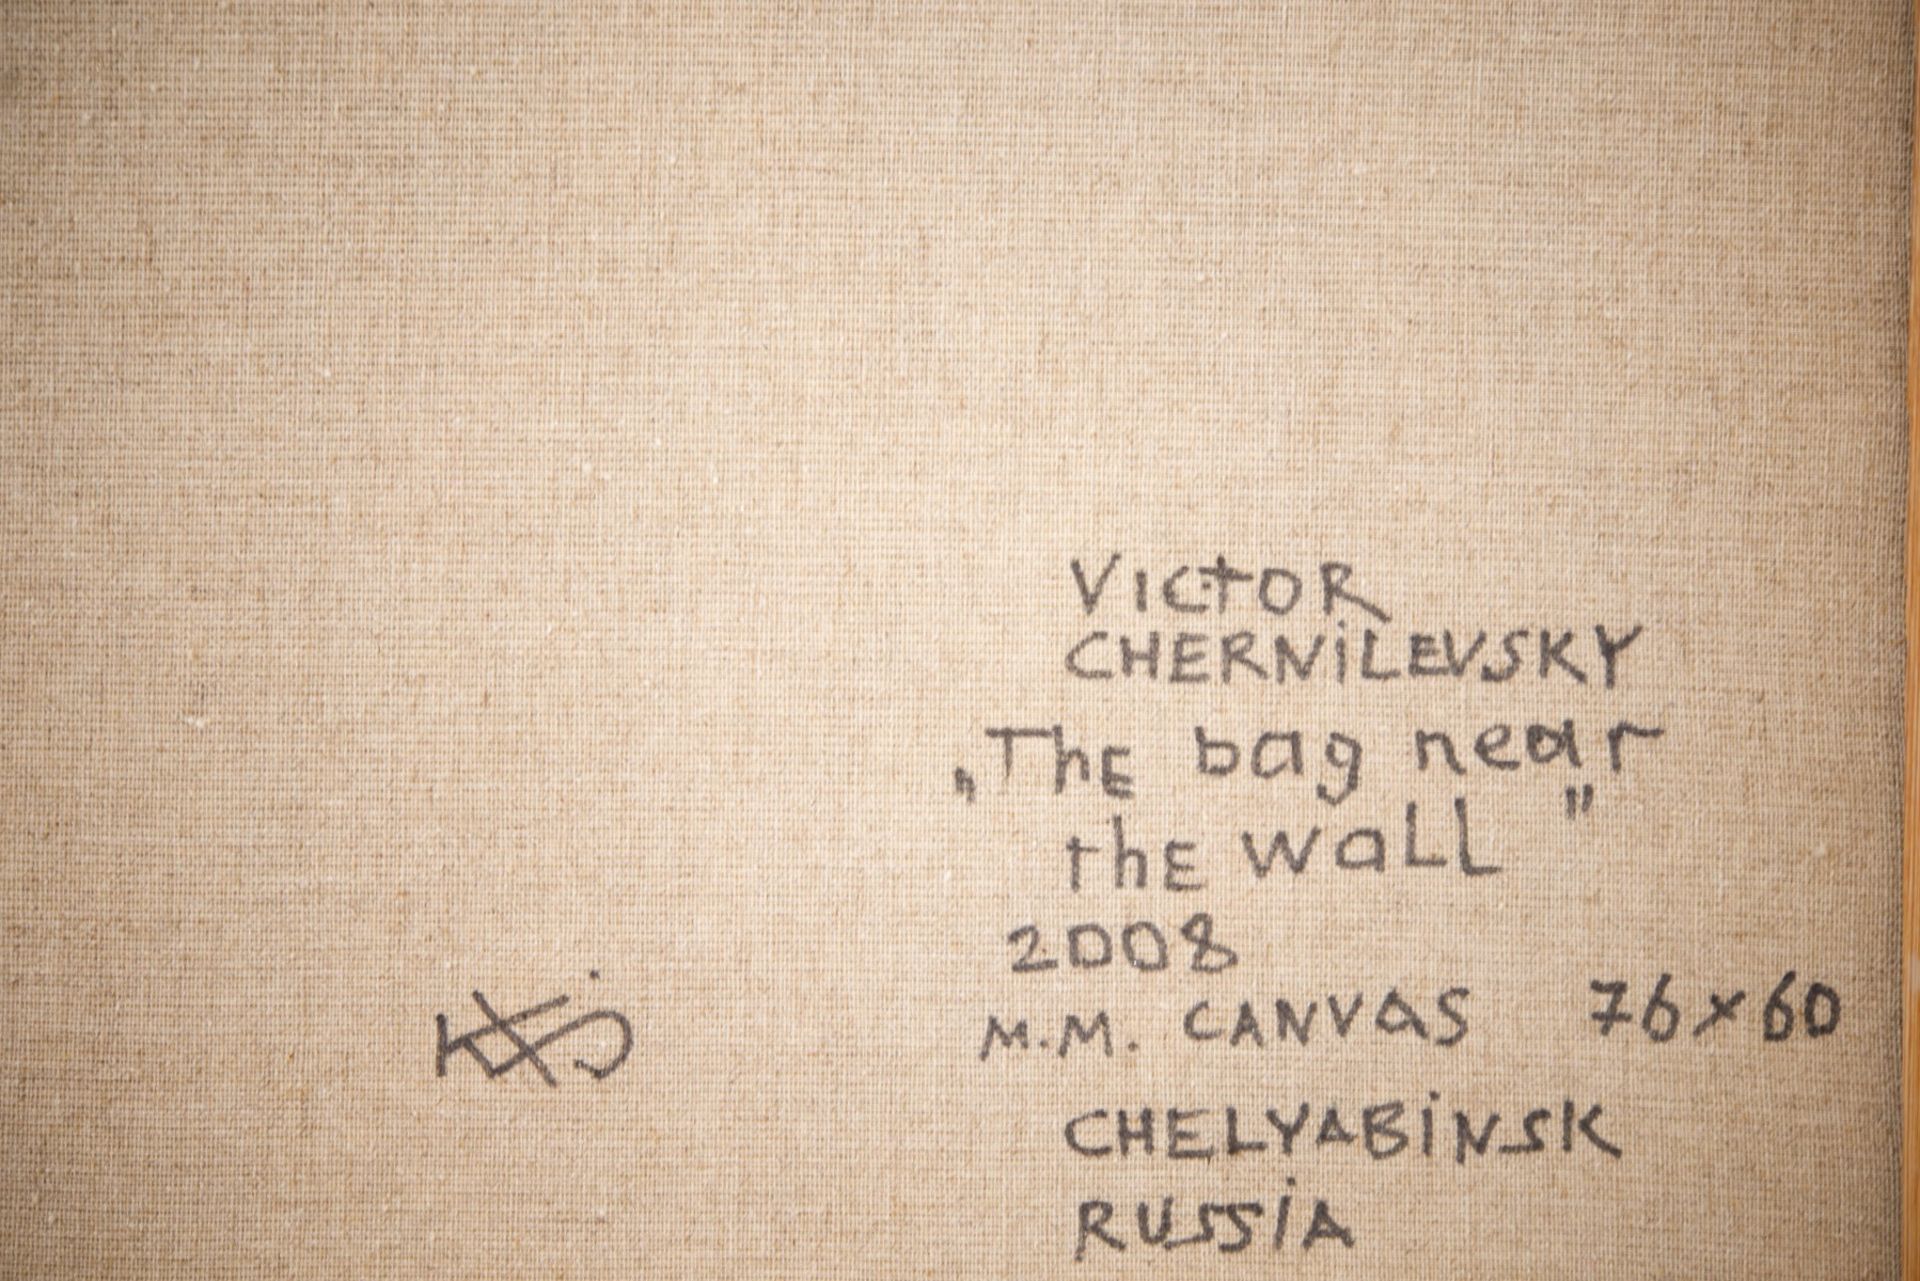 Victor Chernilesvky (1958), Bag Near the Wall 2008 - Image 7 of 7